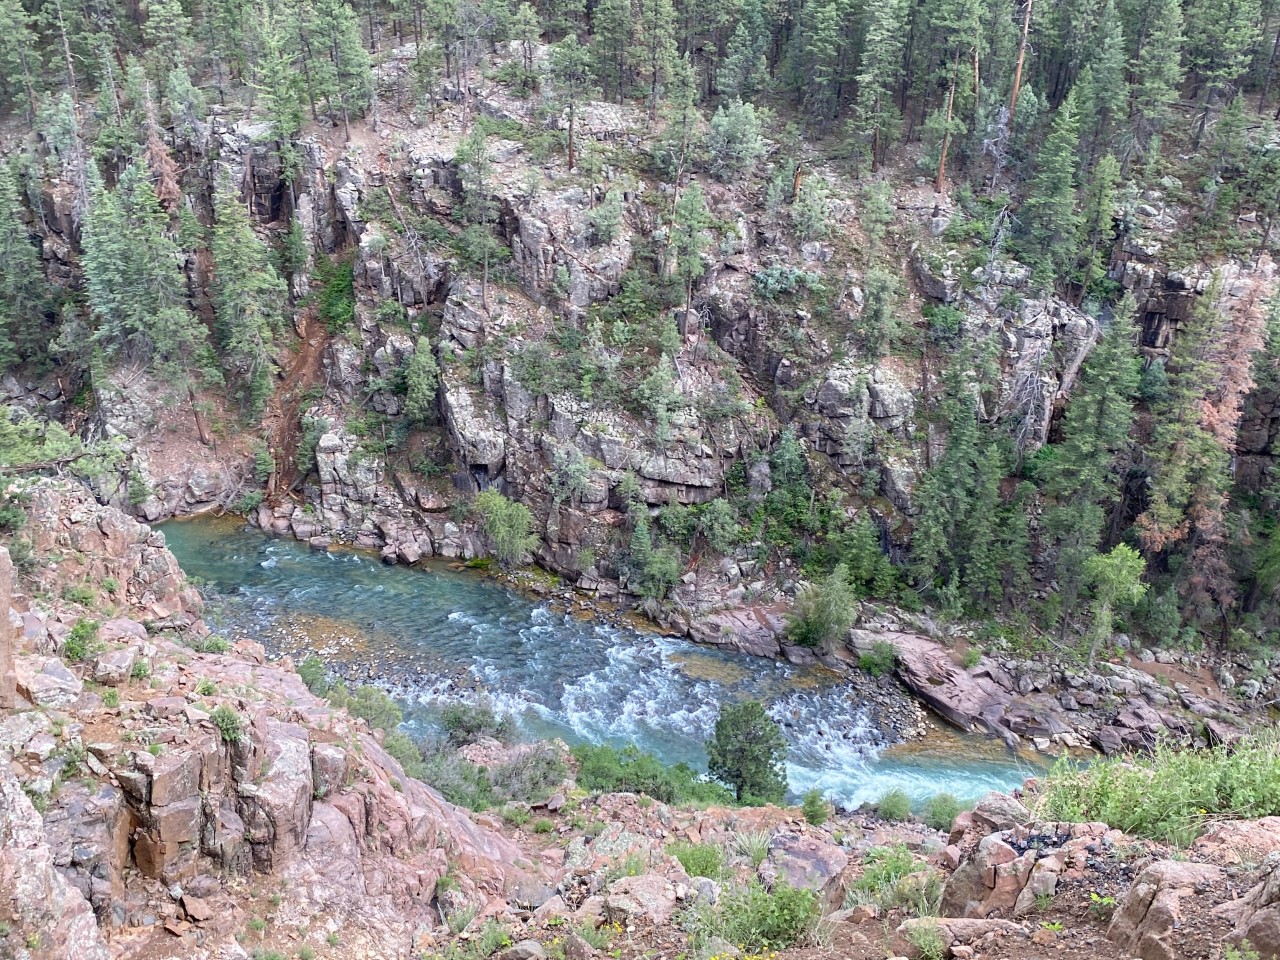 Looking down into the canyon on the return train ride from Silverton